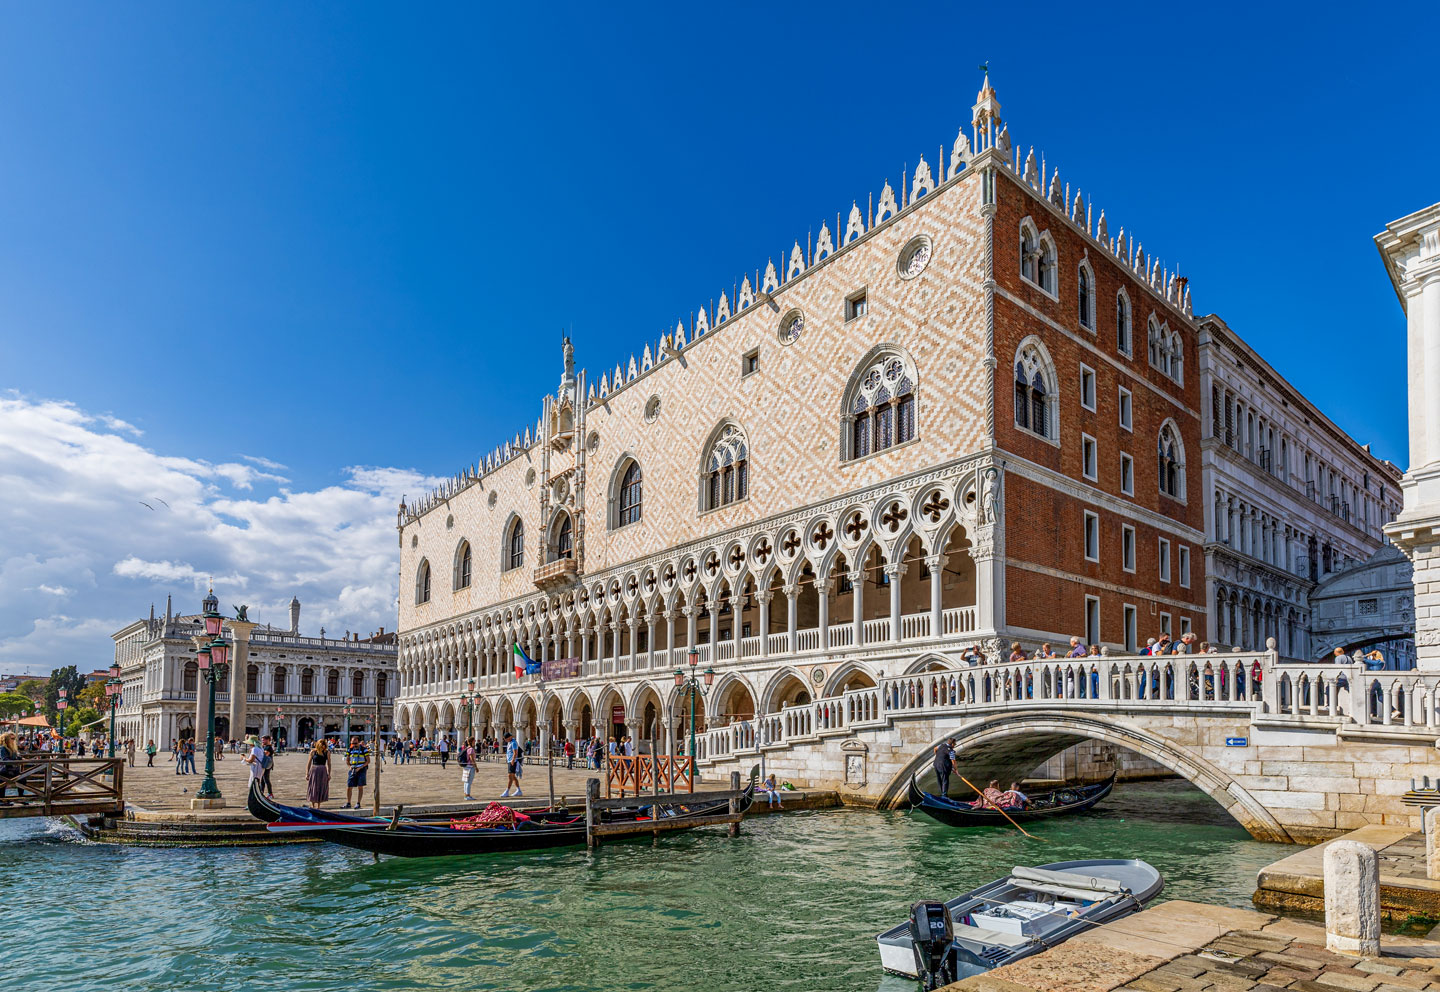 Doge's Palace with the Ponte della Paglia, one of the main landmarks of the city of Venice on the Mediterranean Sea